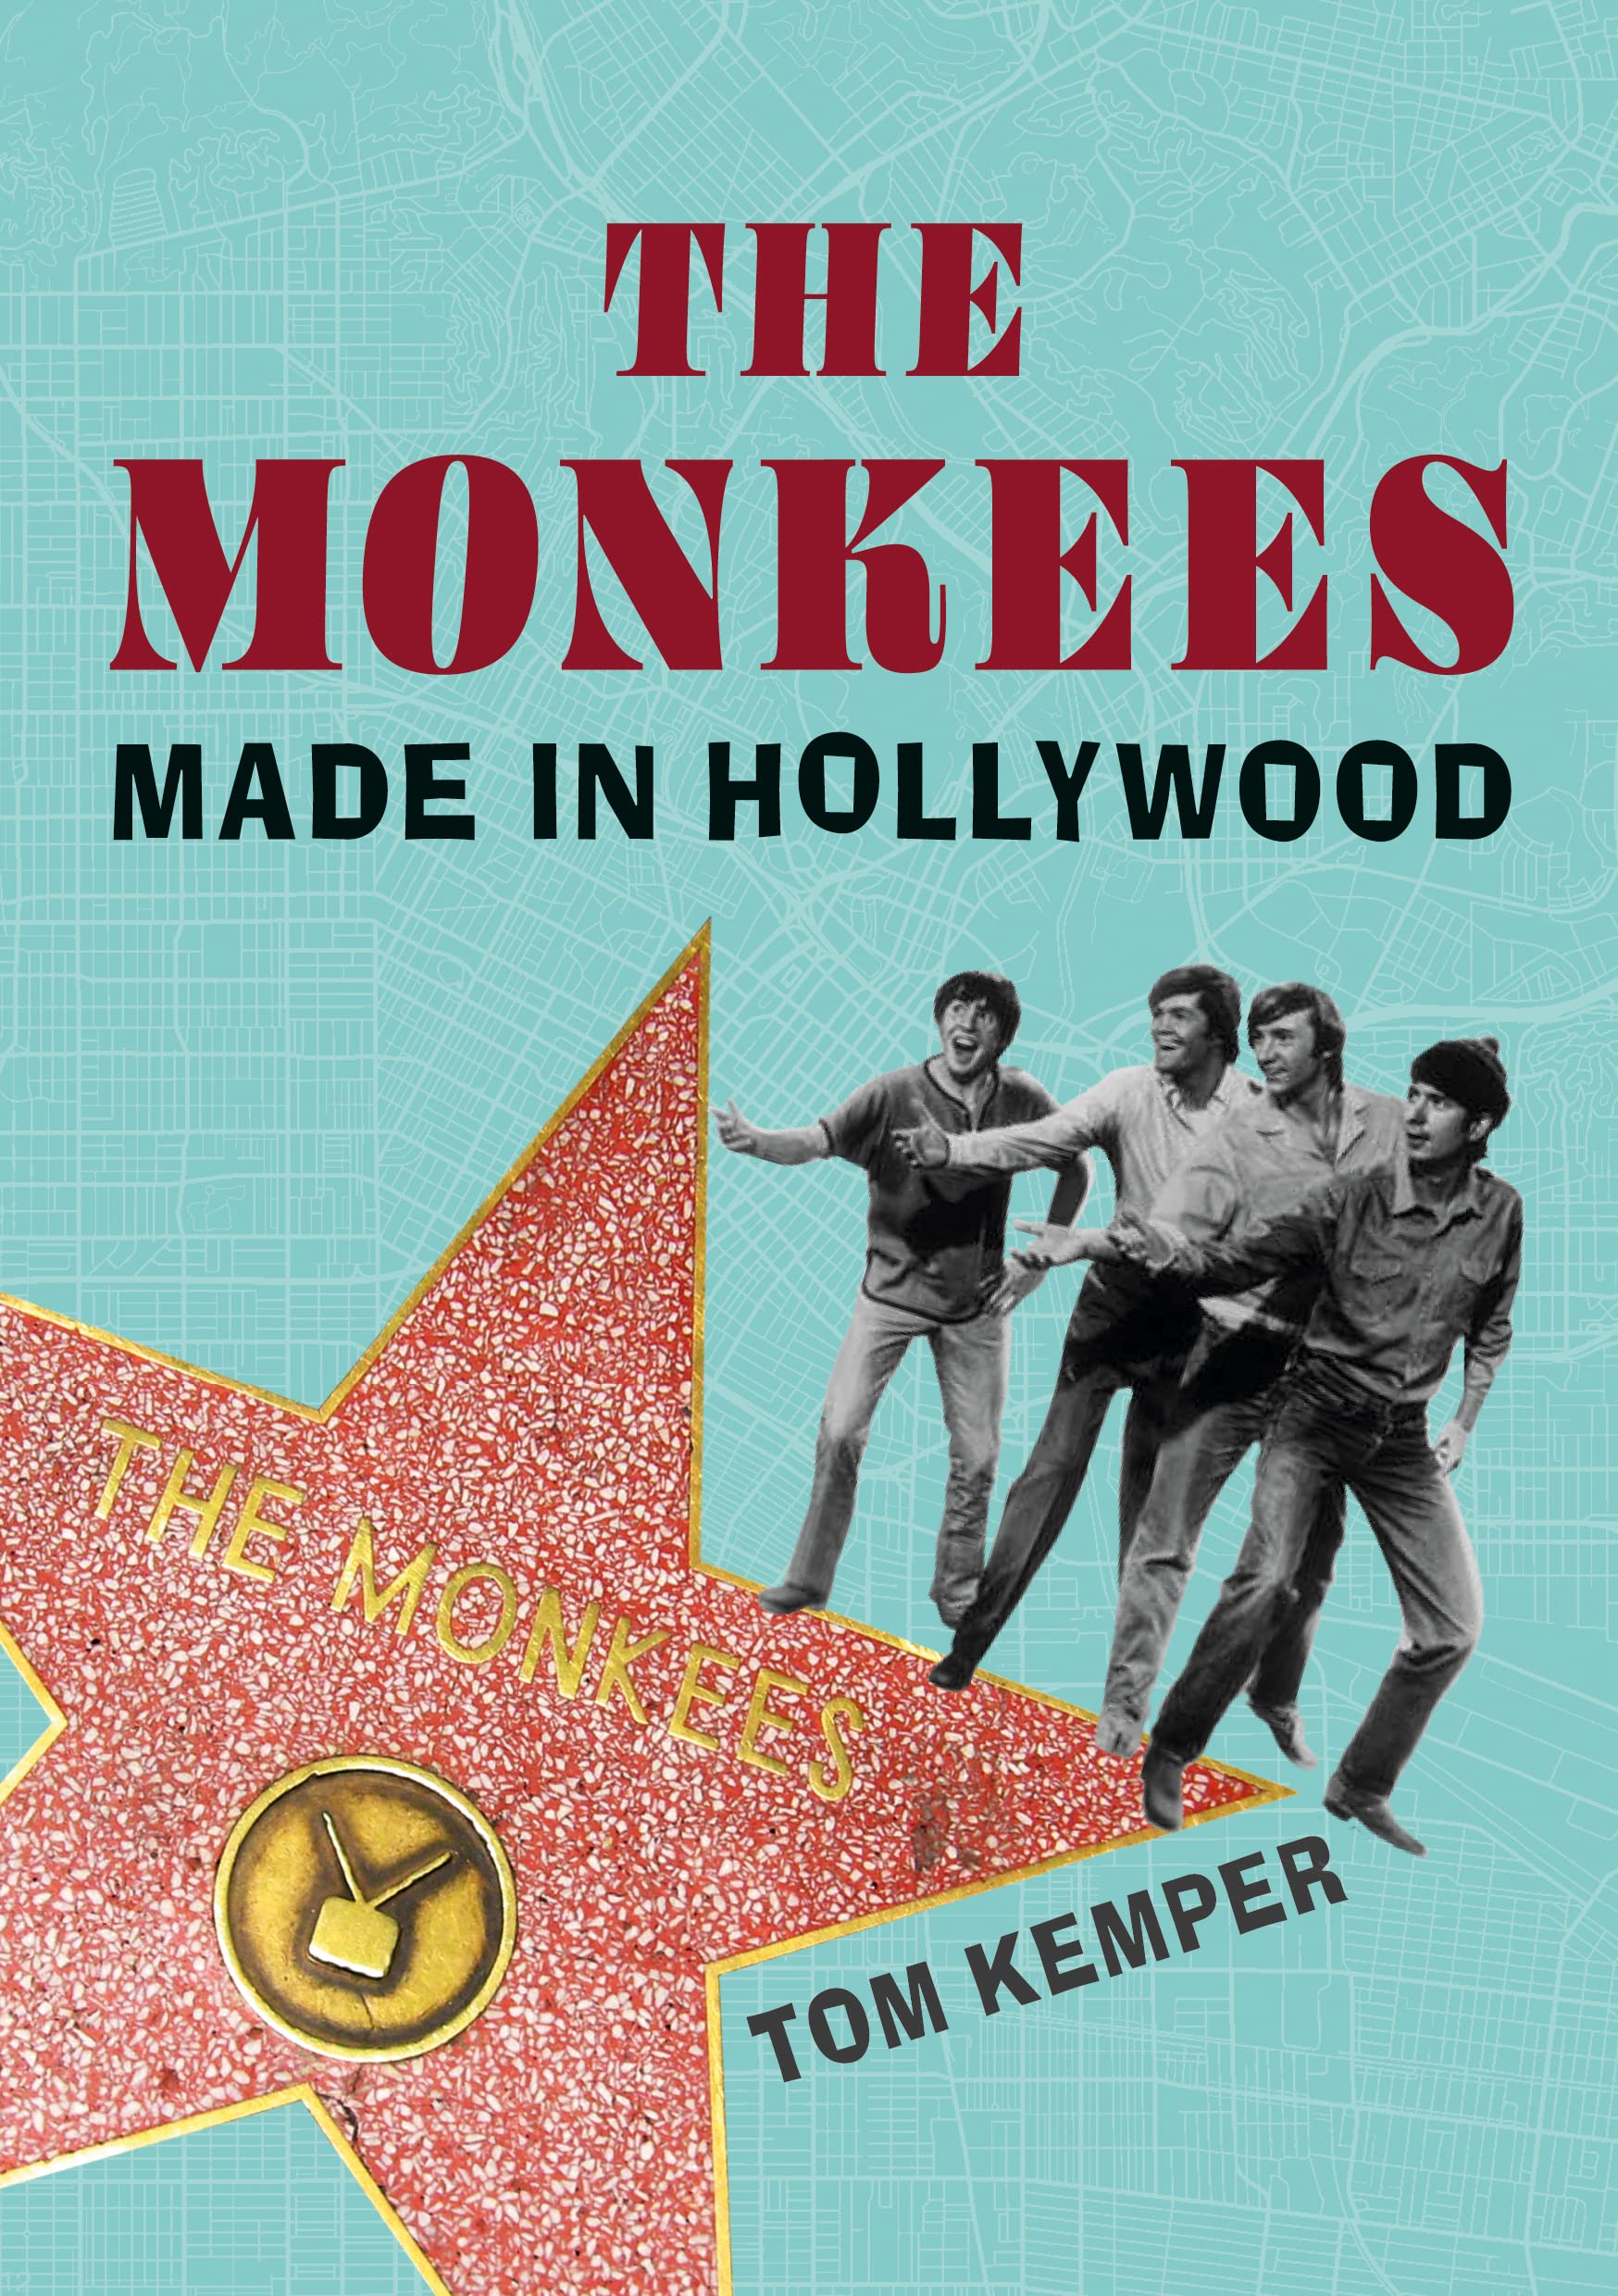 The_Monkees_made_in_Hollywood_book_cover